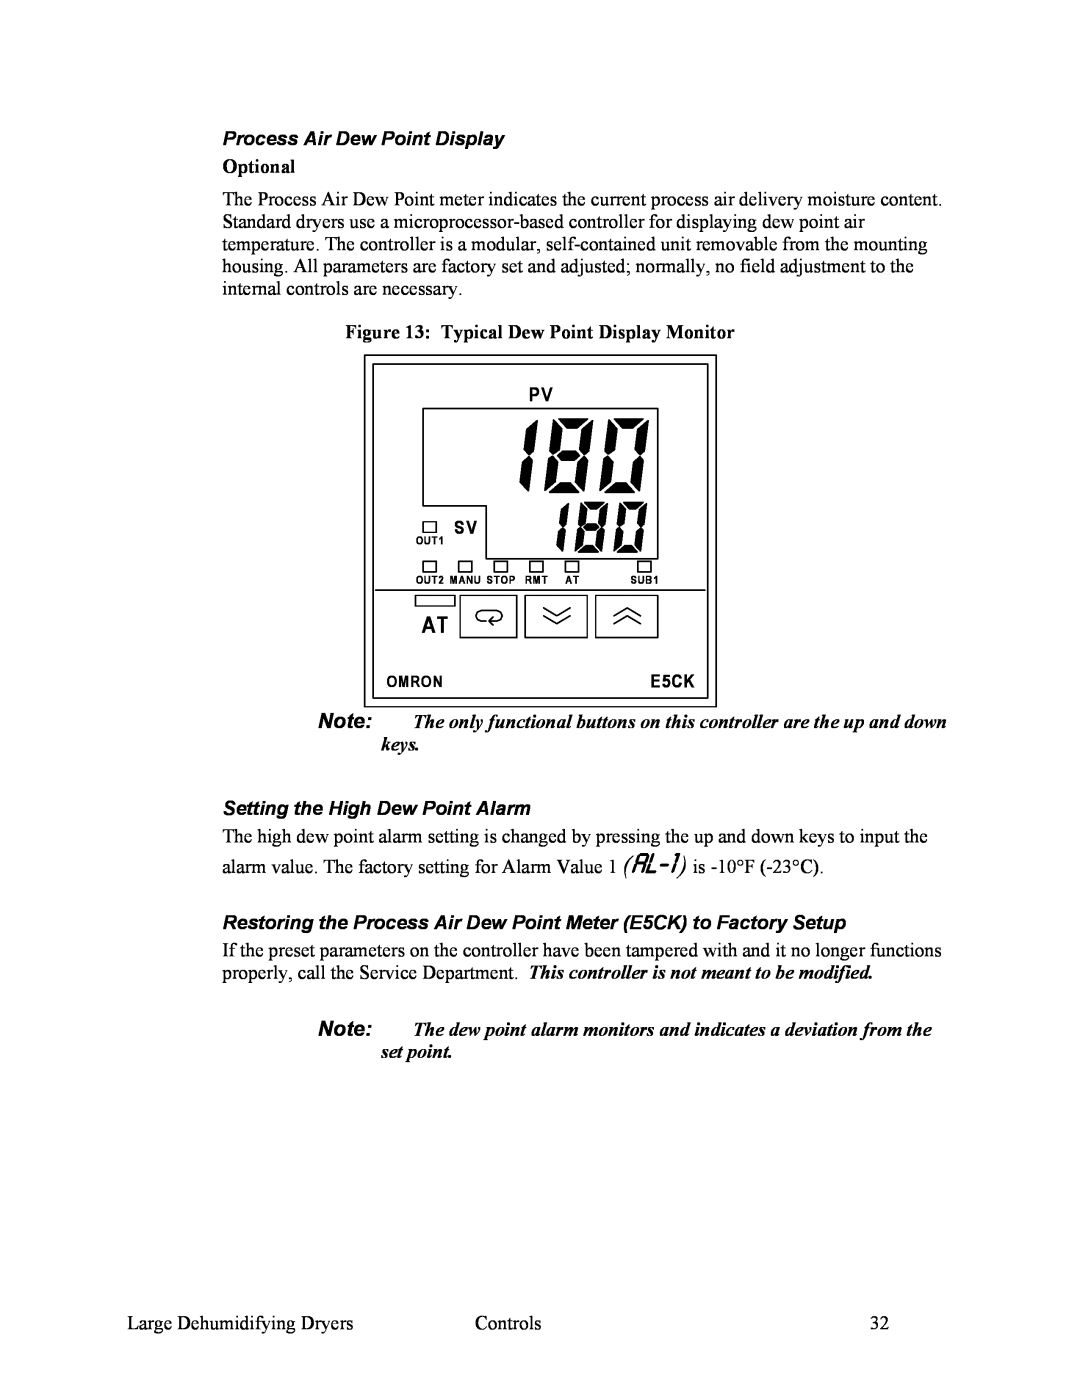 Sterling SDA 1000-5100 specifications Process Air Dew Point Display, Optional, Typical Dew Point Display Monitor 